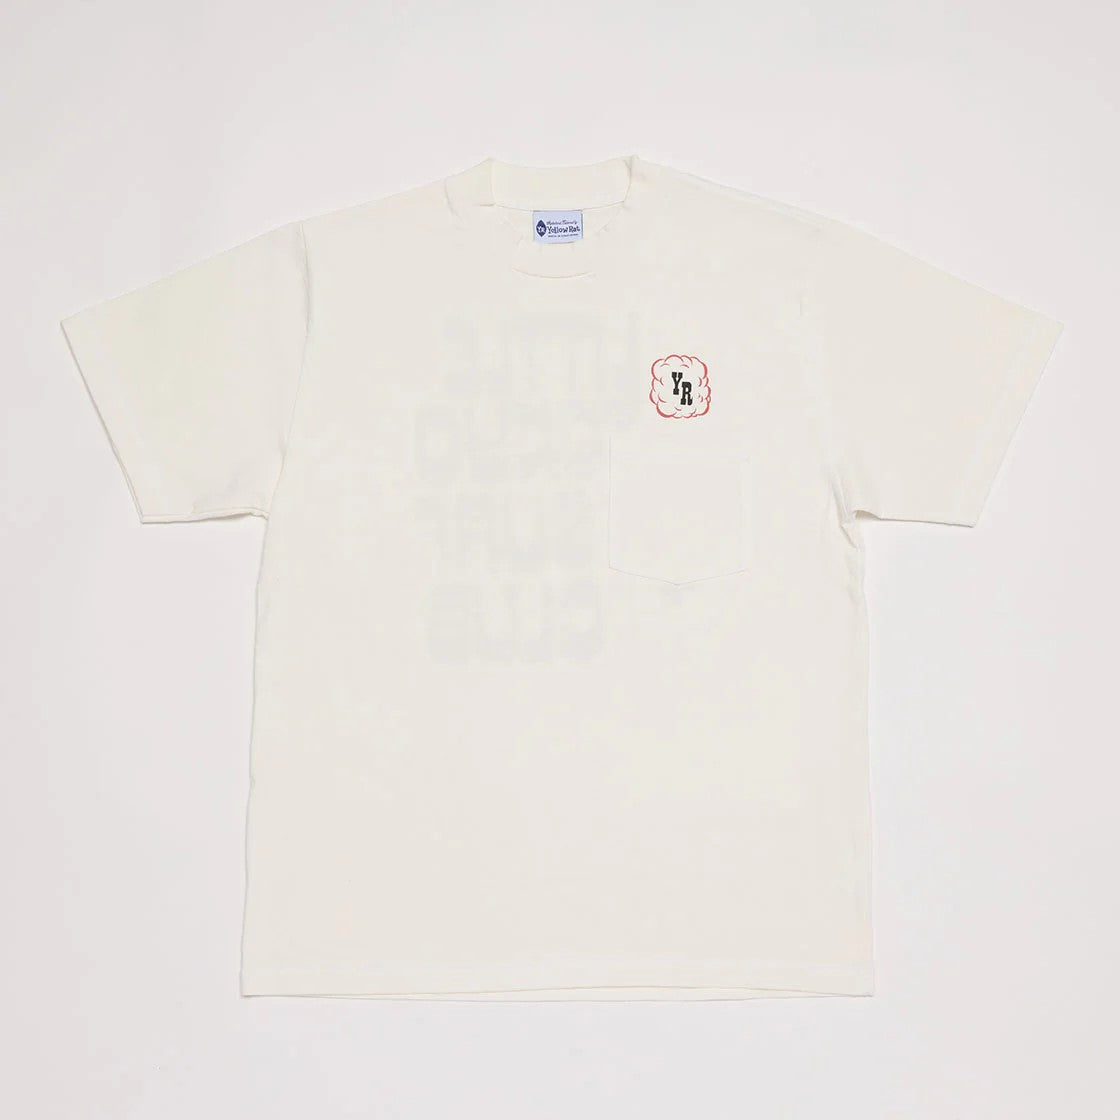 Little Tokyo Surf Club T-shirt by Yellow Rat, Barry McGee - White